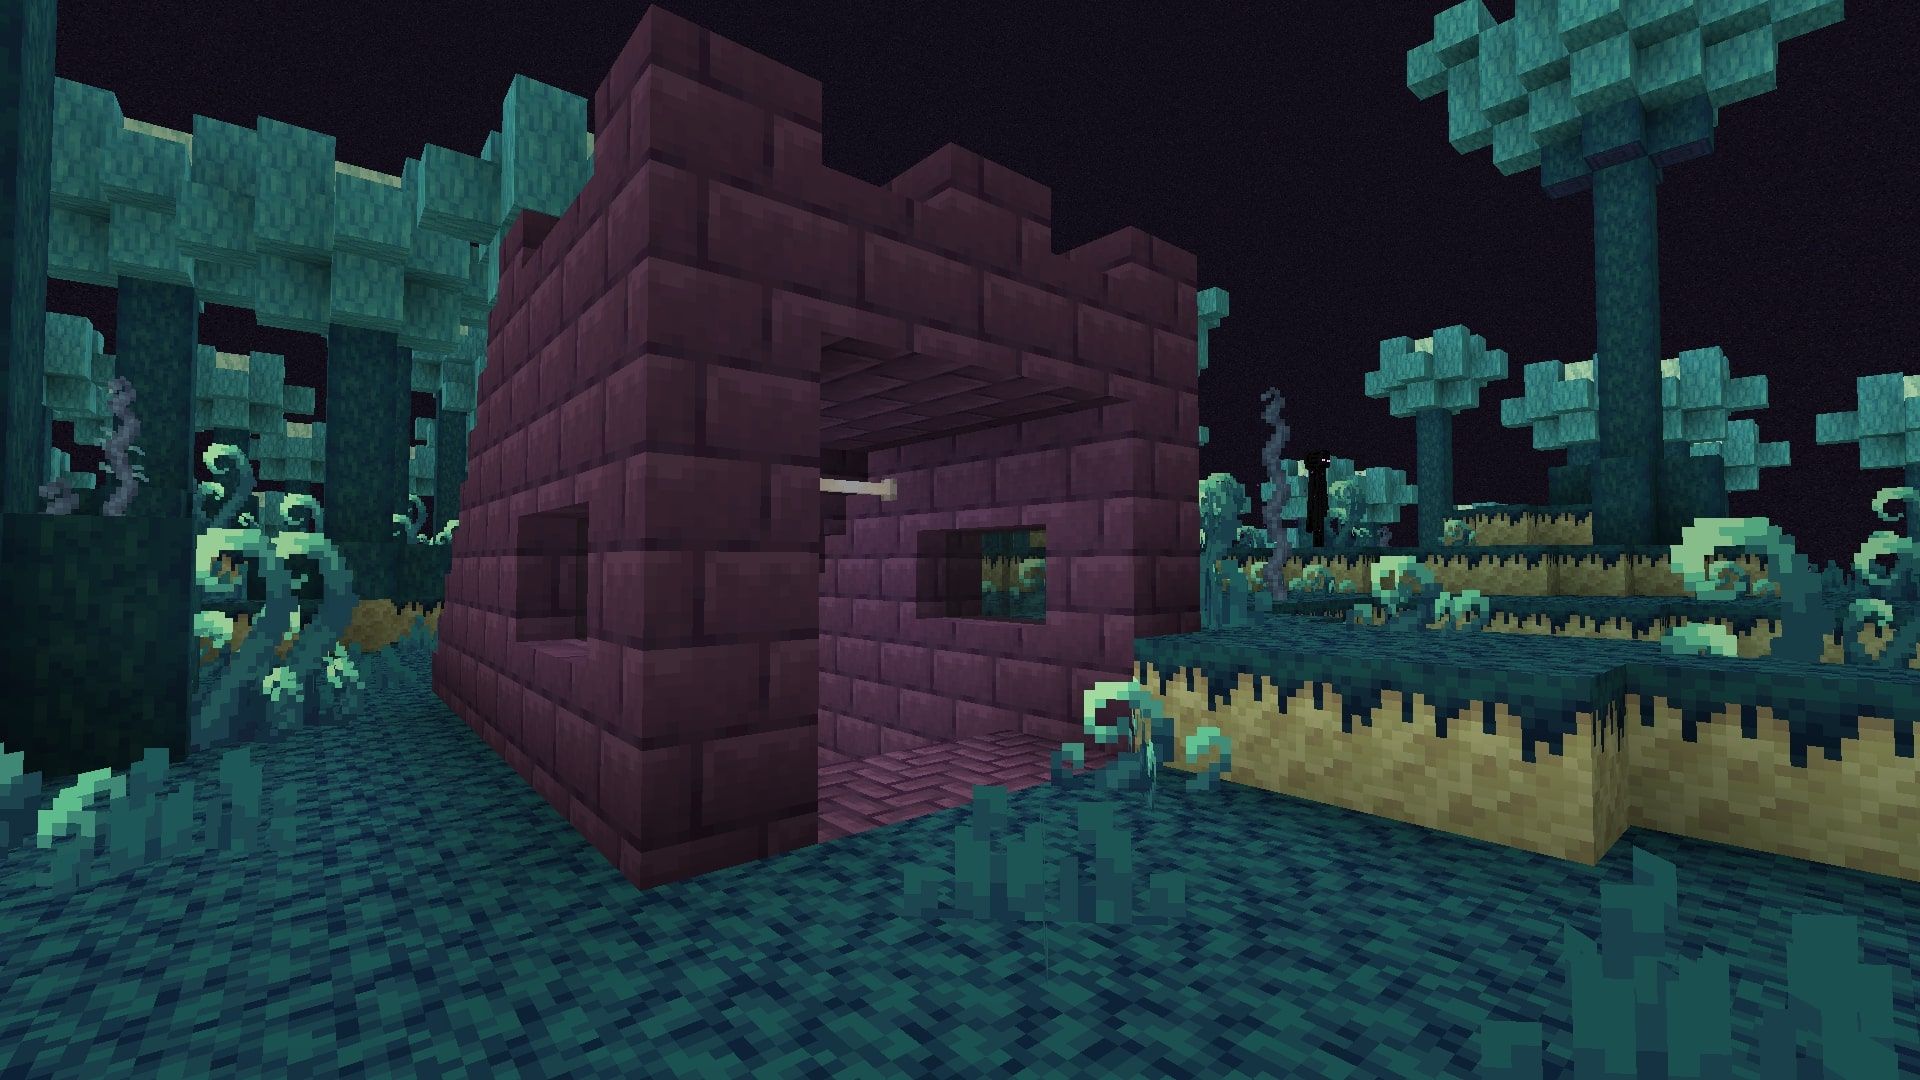 A image of the Azre Forest biome in The End, with the purple building signifying the entrance to the catacombs.